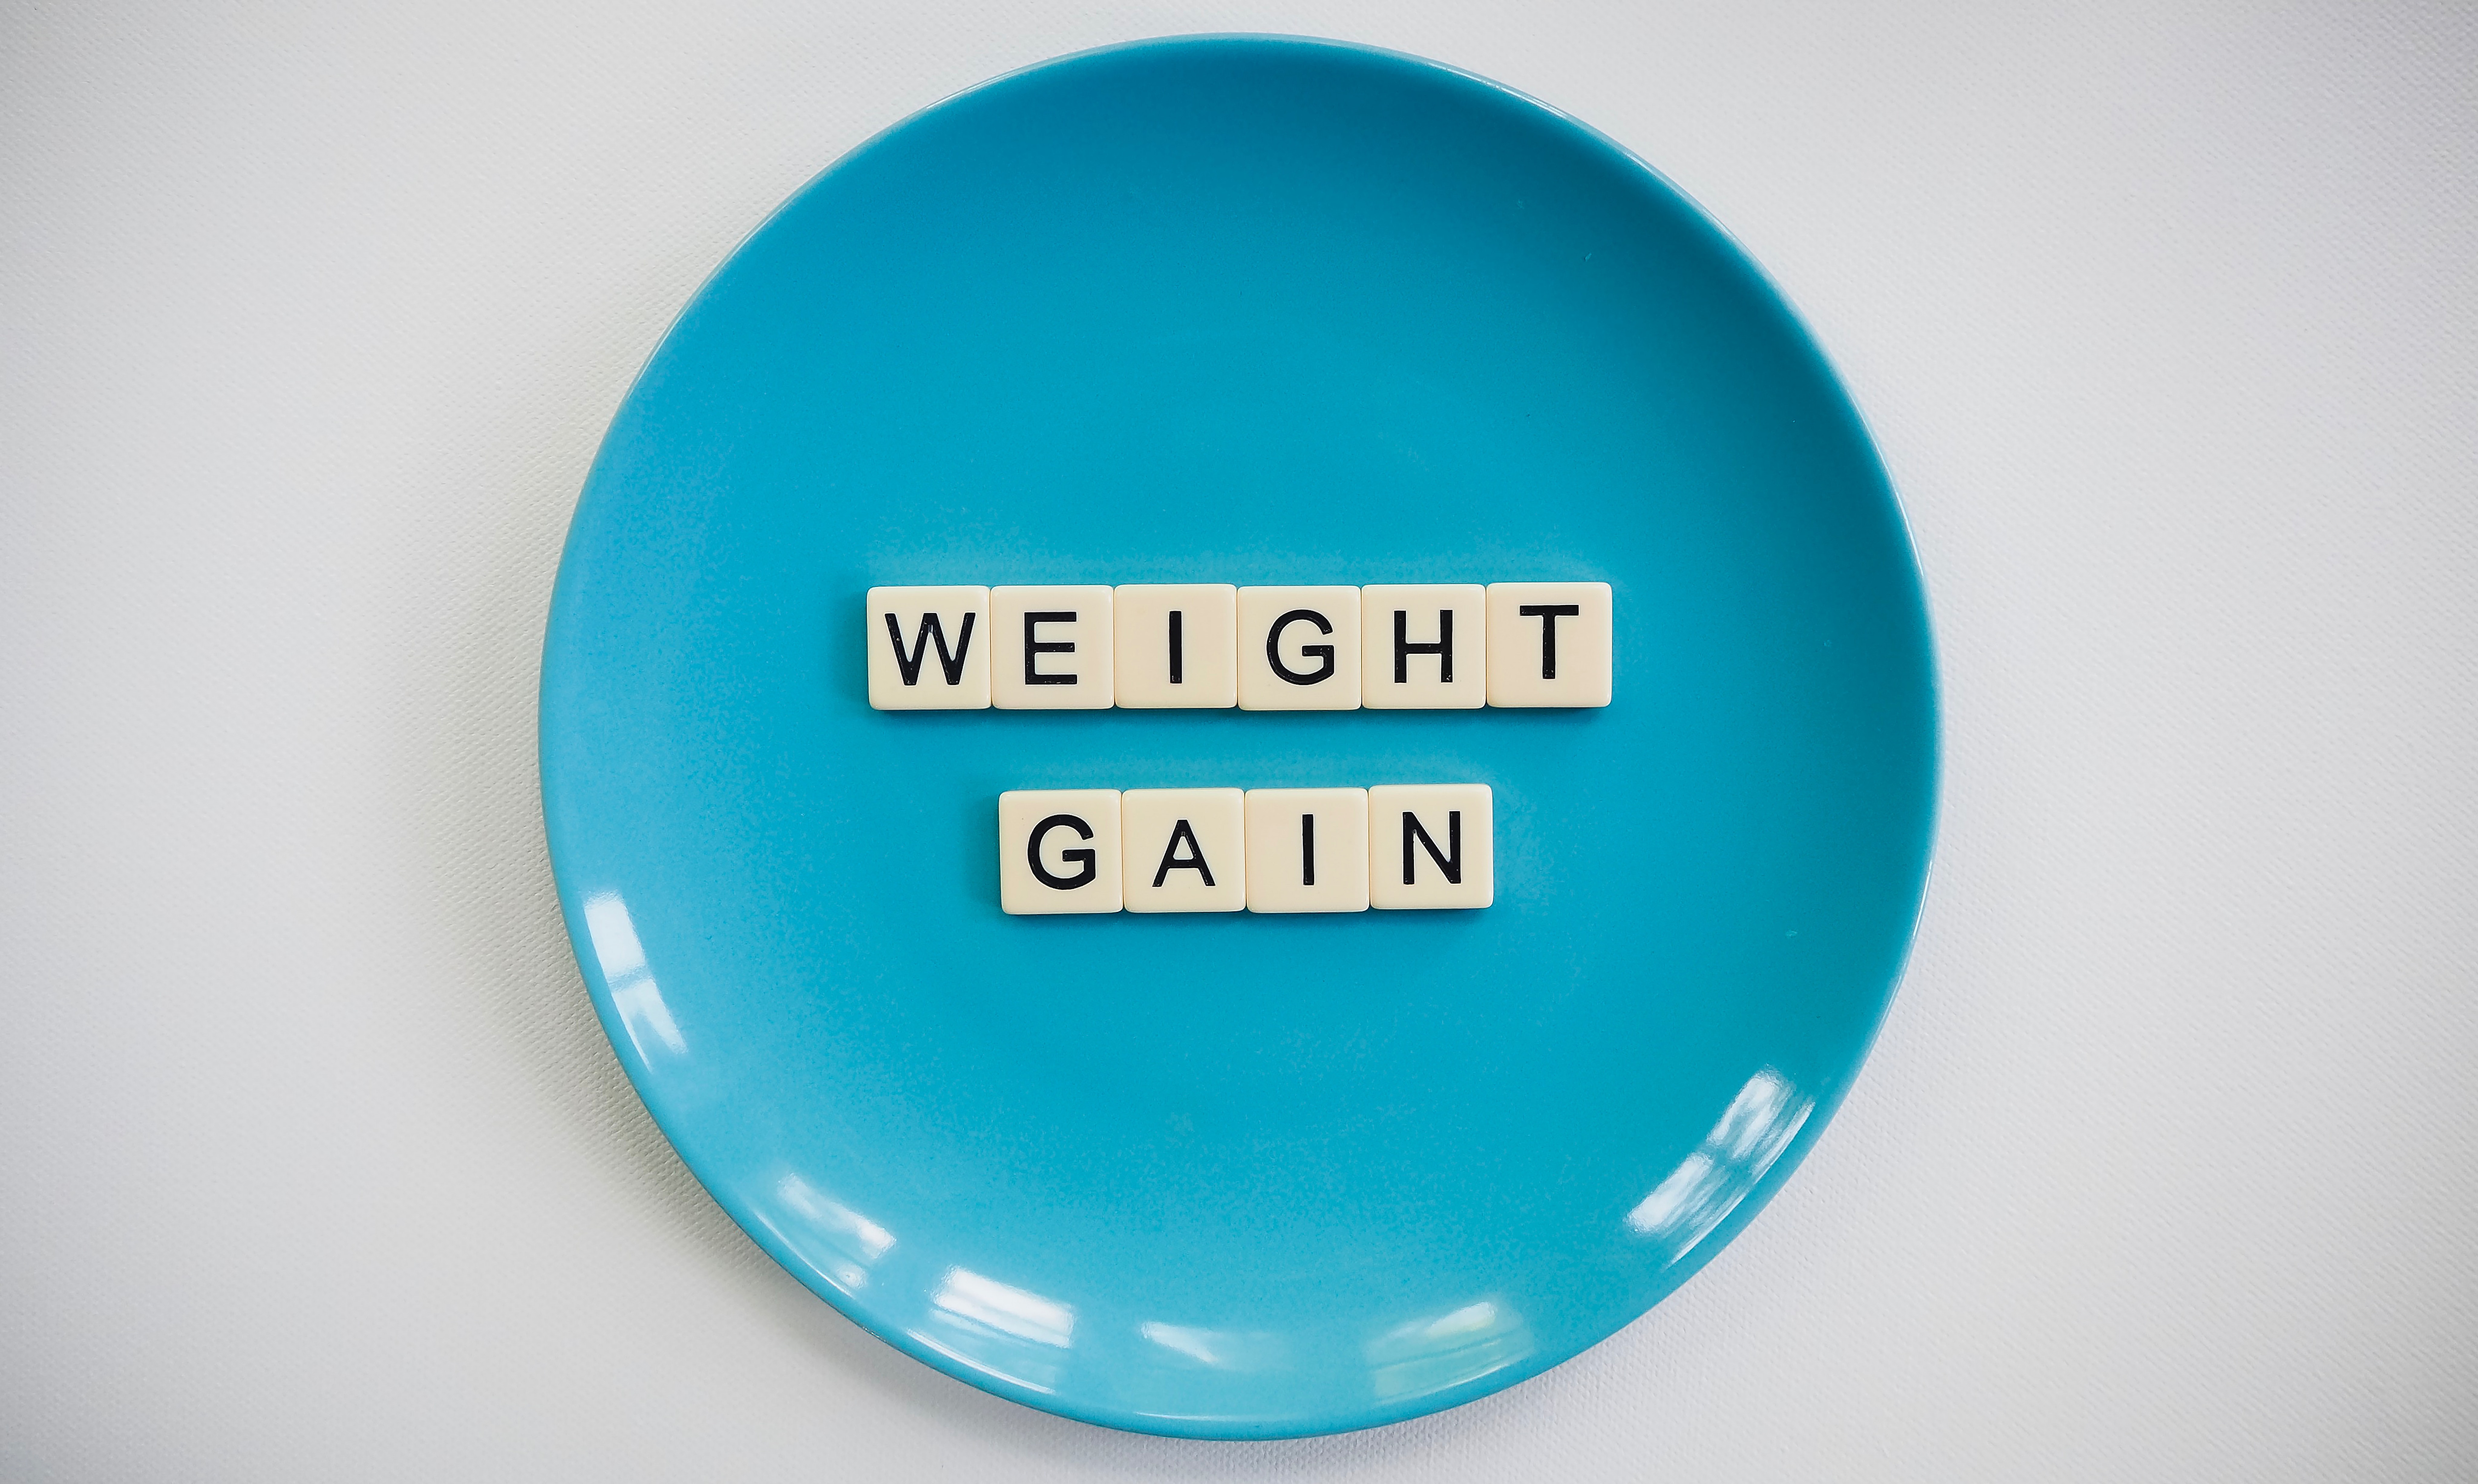 Weight Gain Tips - kHWy3nONQrOY0gAfrXAd